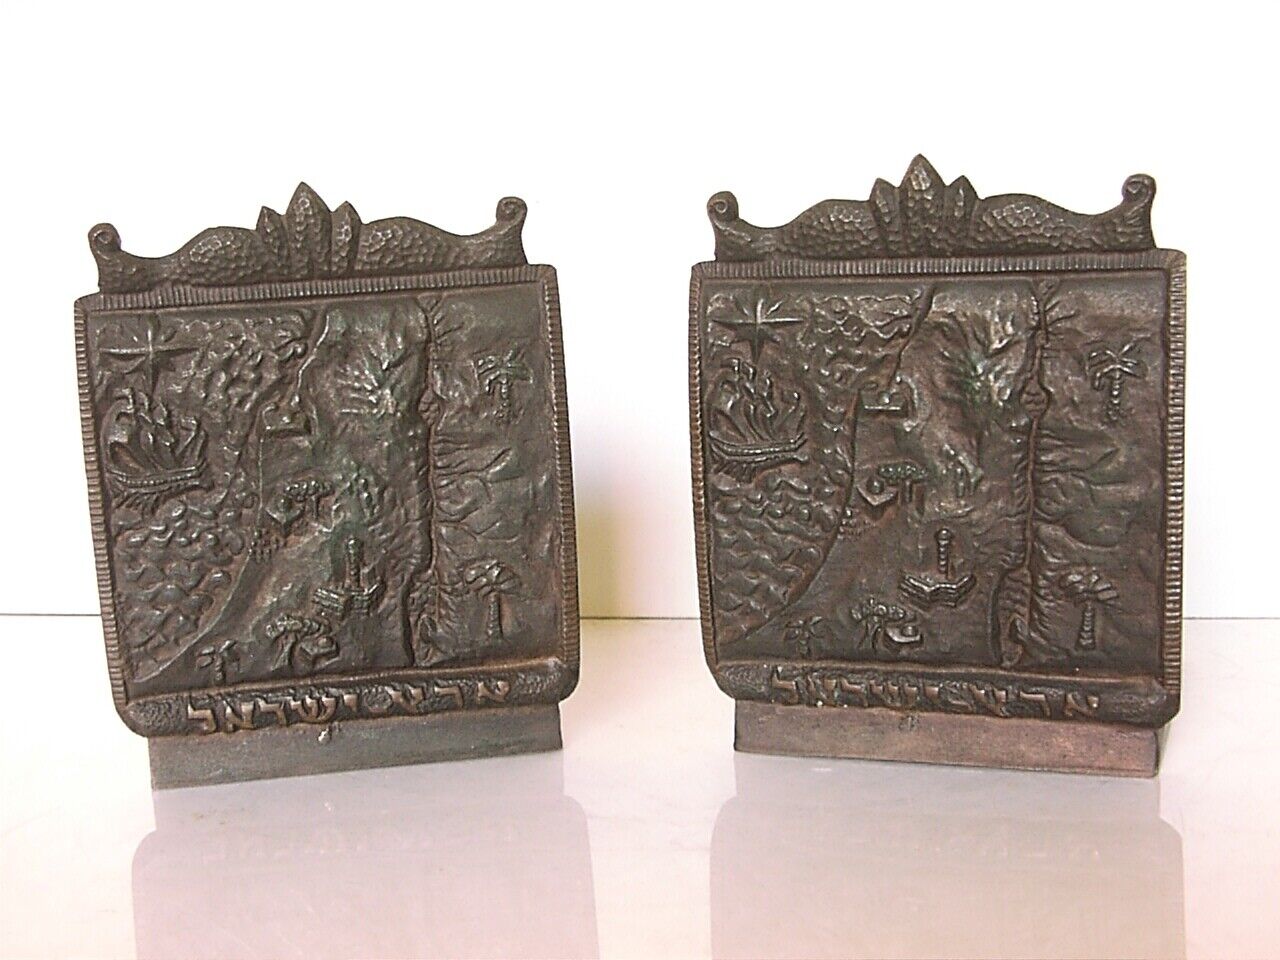 Map of ERETZ-ISRAEL  bronze bookends by Oppenheim made in Palestine c.1940